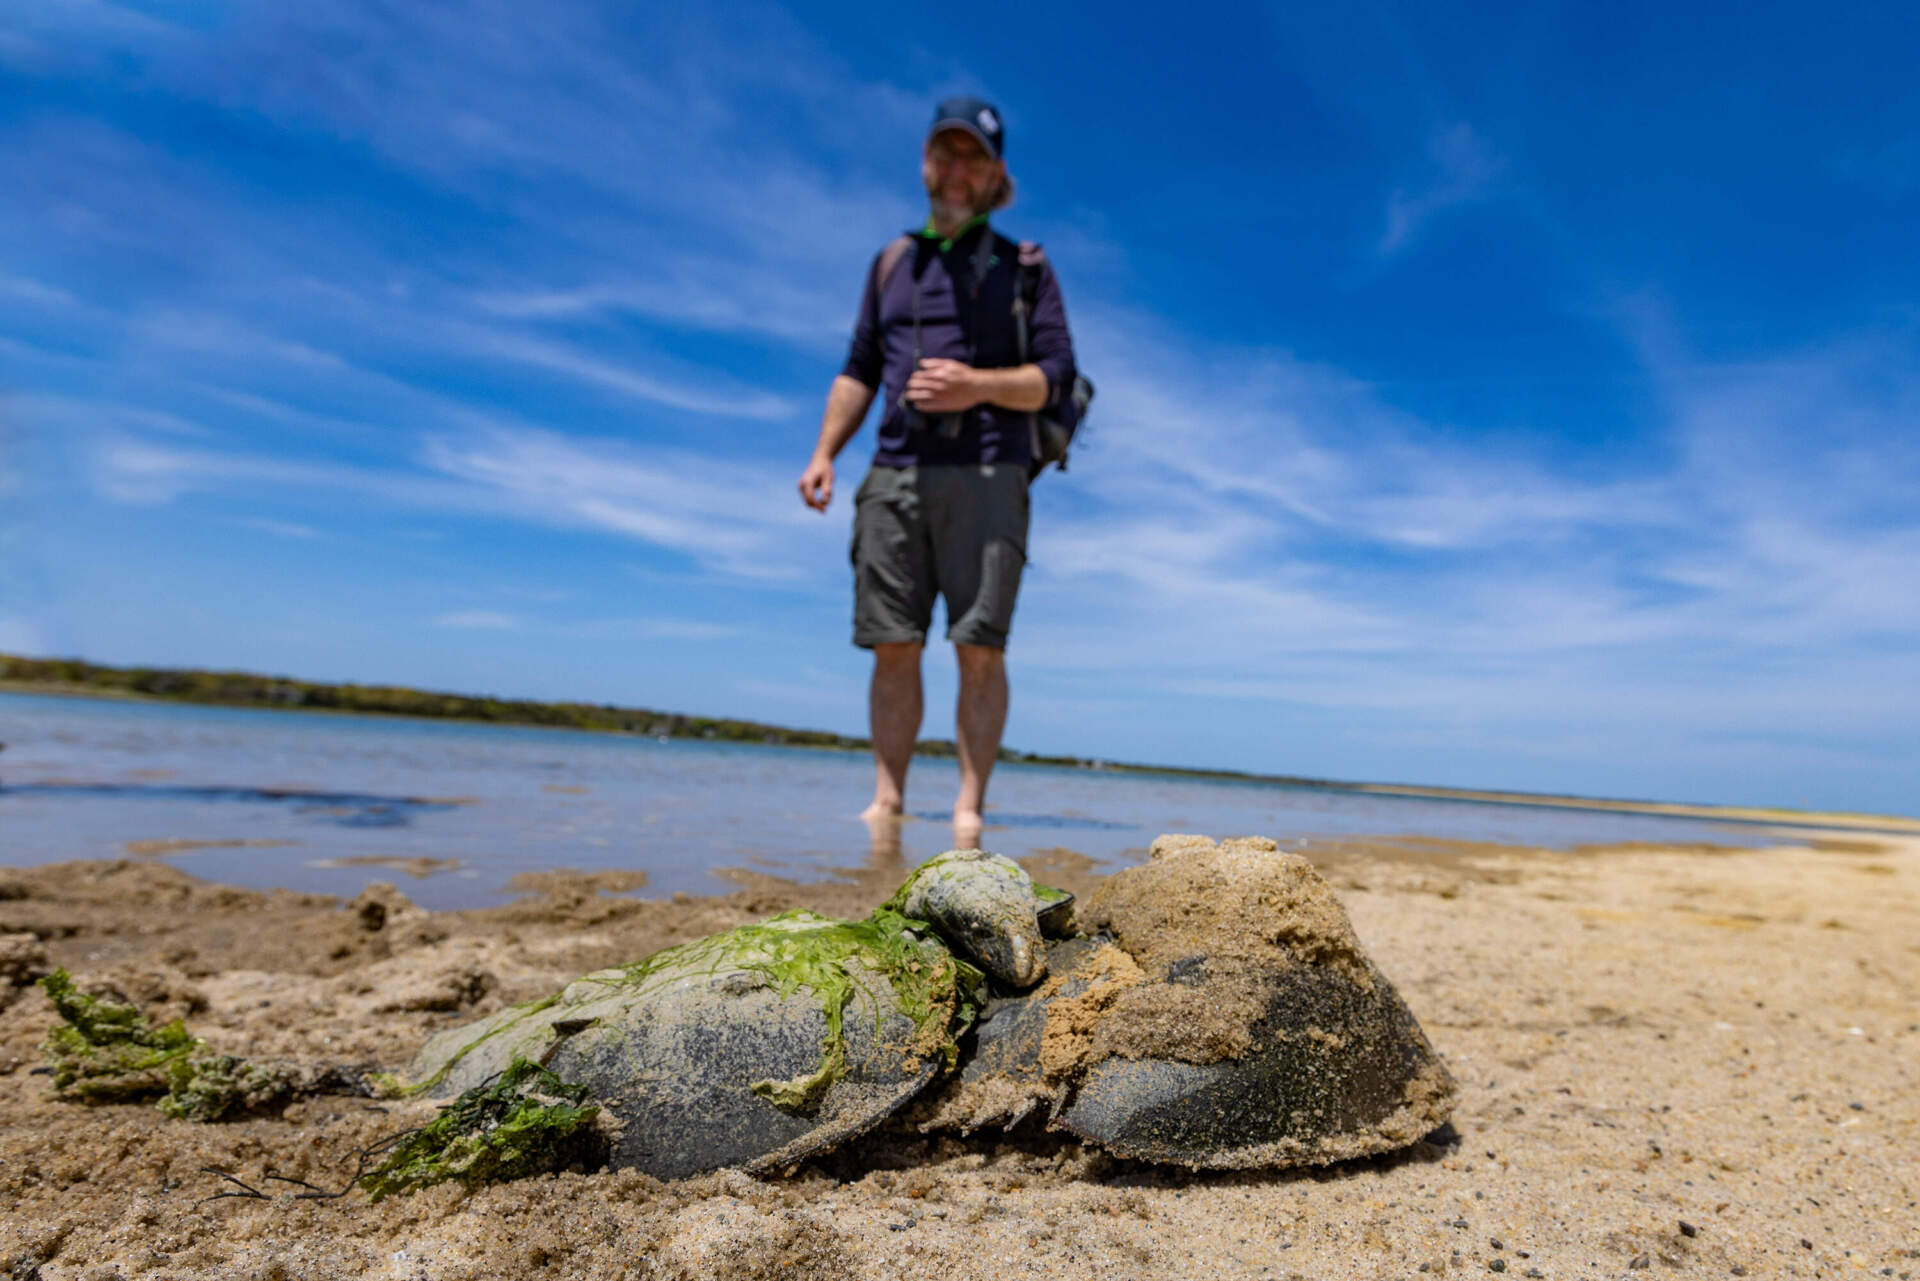 Mark Faherty, science coordinator at Mass Audubon's Wellfleet Bay Wildlife Sanctuary, watches as a female horseshoe crab drags a smaller male, attached to her back, across the sand. (Jesse Costa/WBUR)